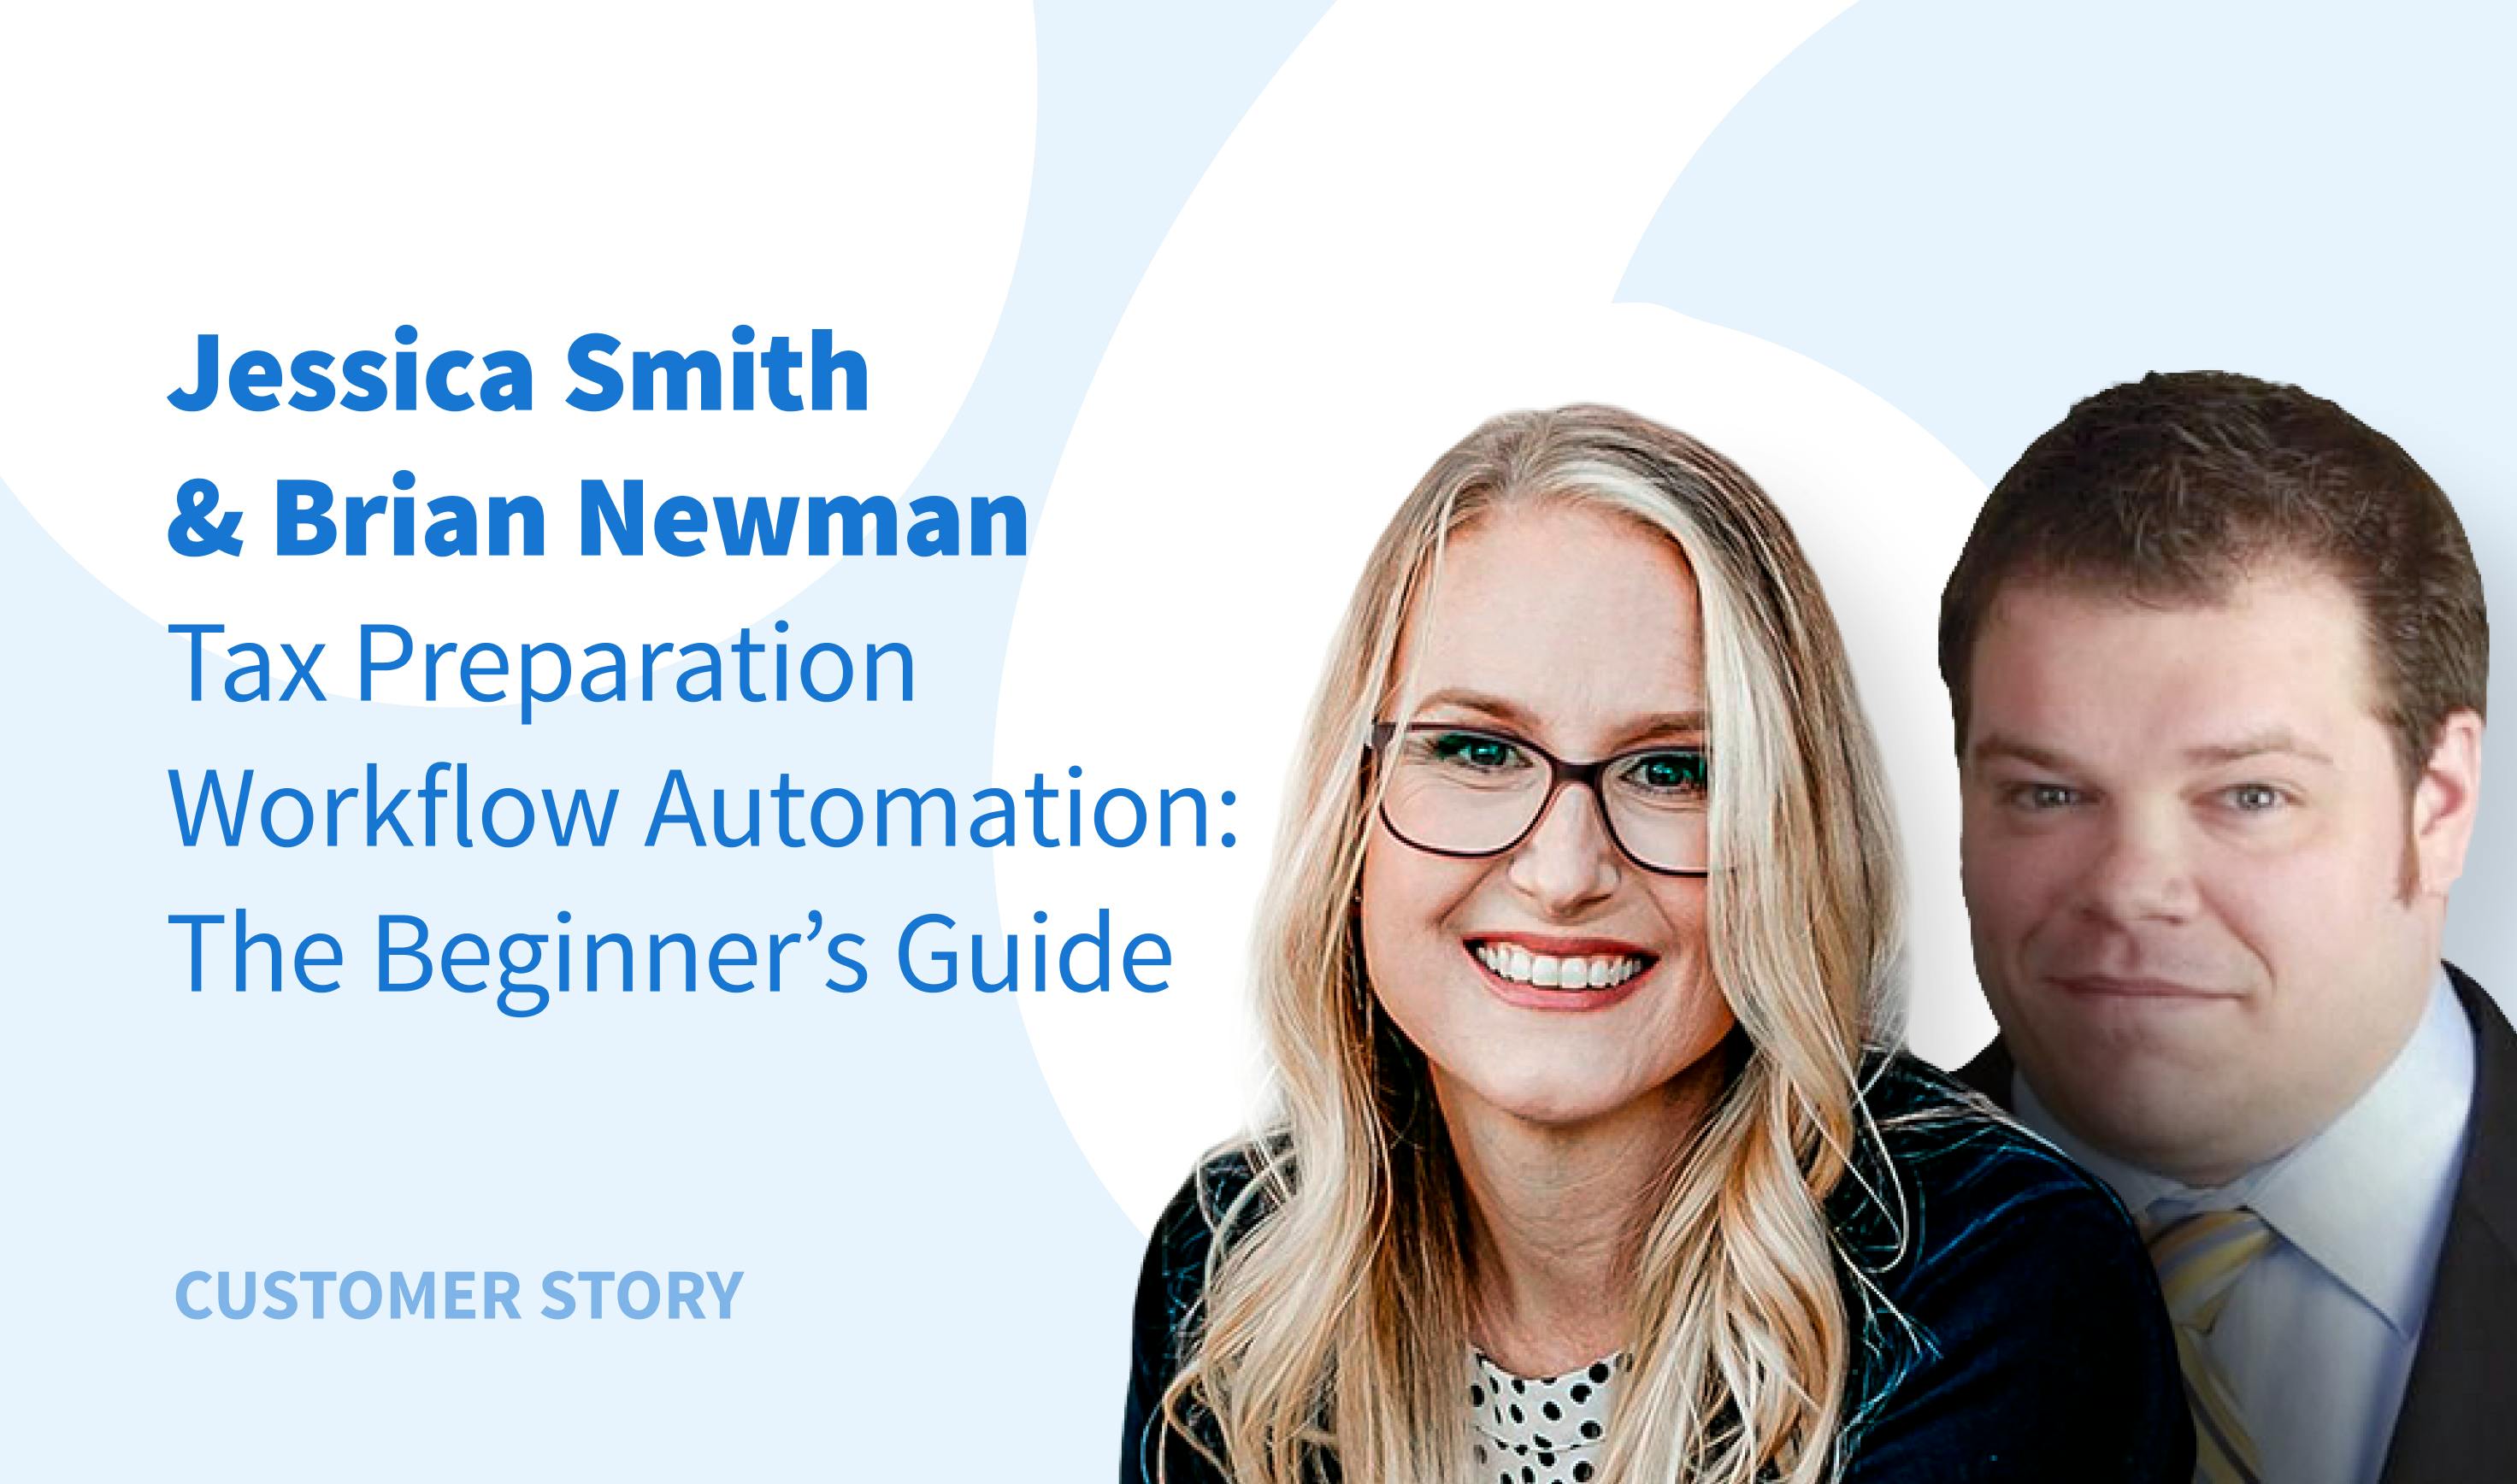 Jessica Smith & Brian Newman on tax workflow automation with TaxDome.